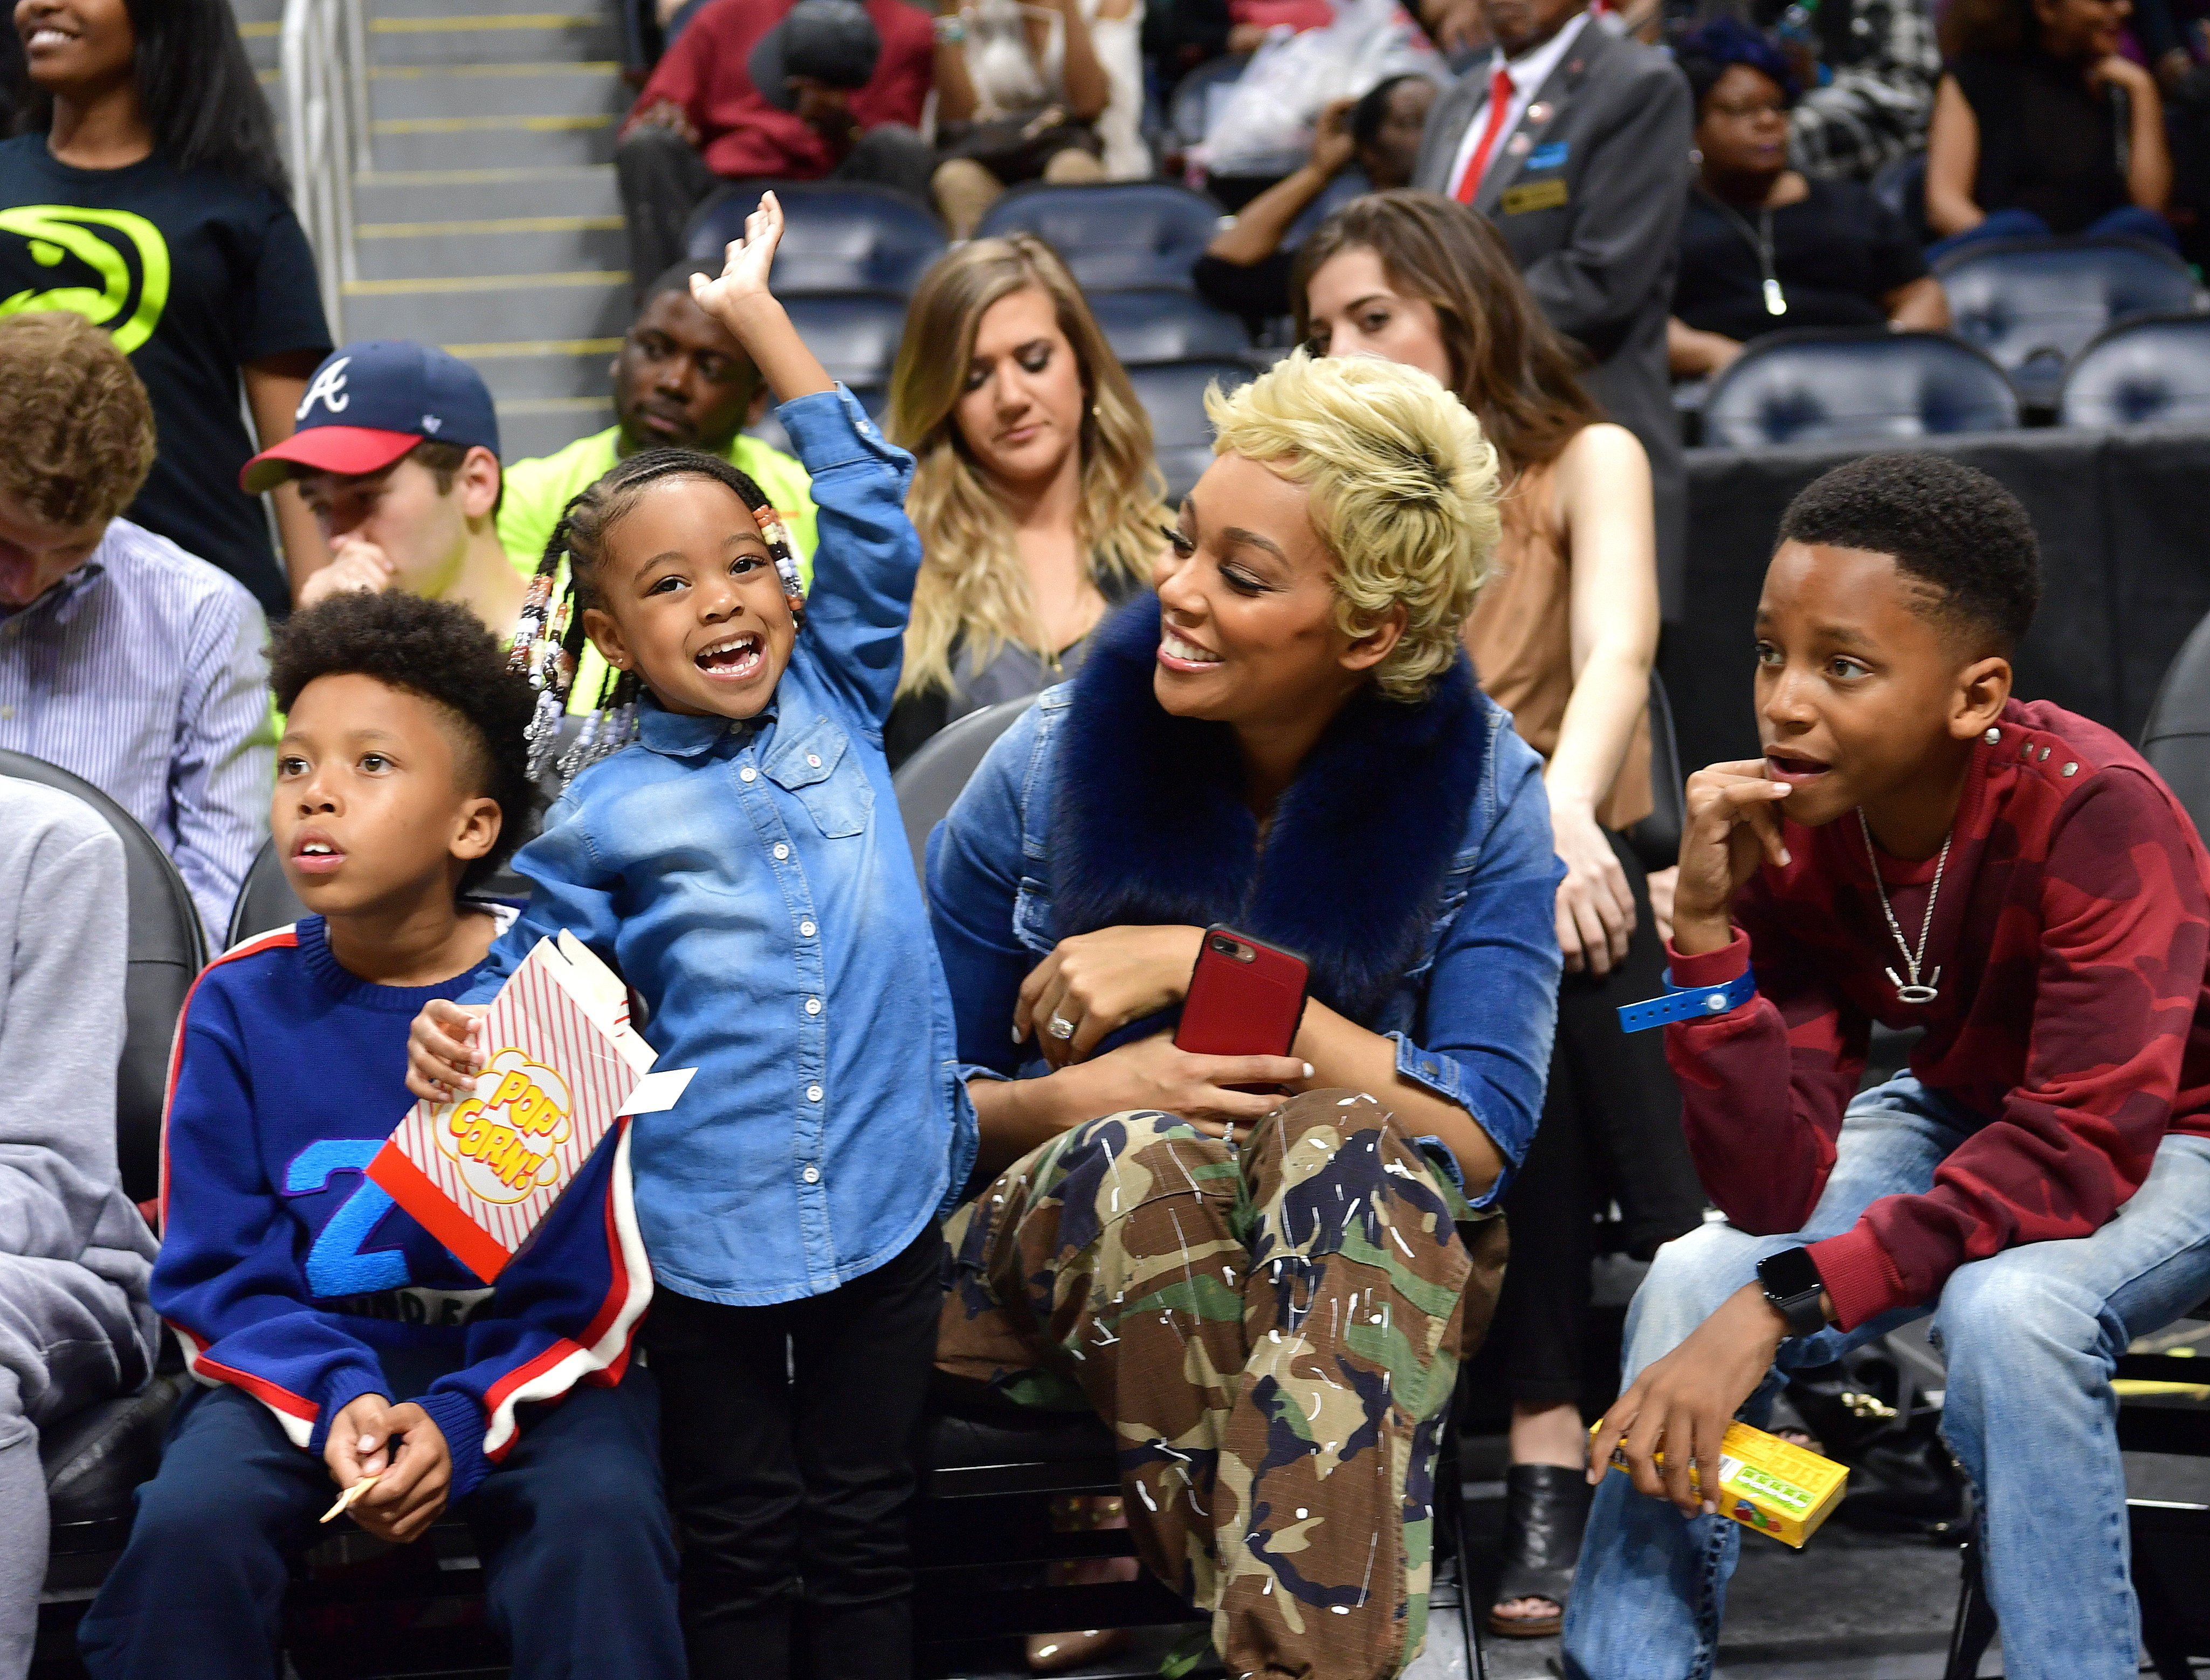 Monica & her kids (L-R) Romelo, Laiyah & Rodney at a basketball game in Atlanta, Georgia on March 1, 2017. | Photo: Getty Images